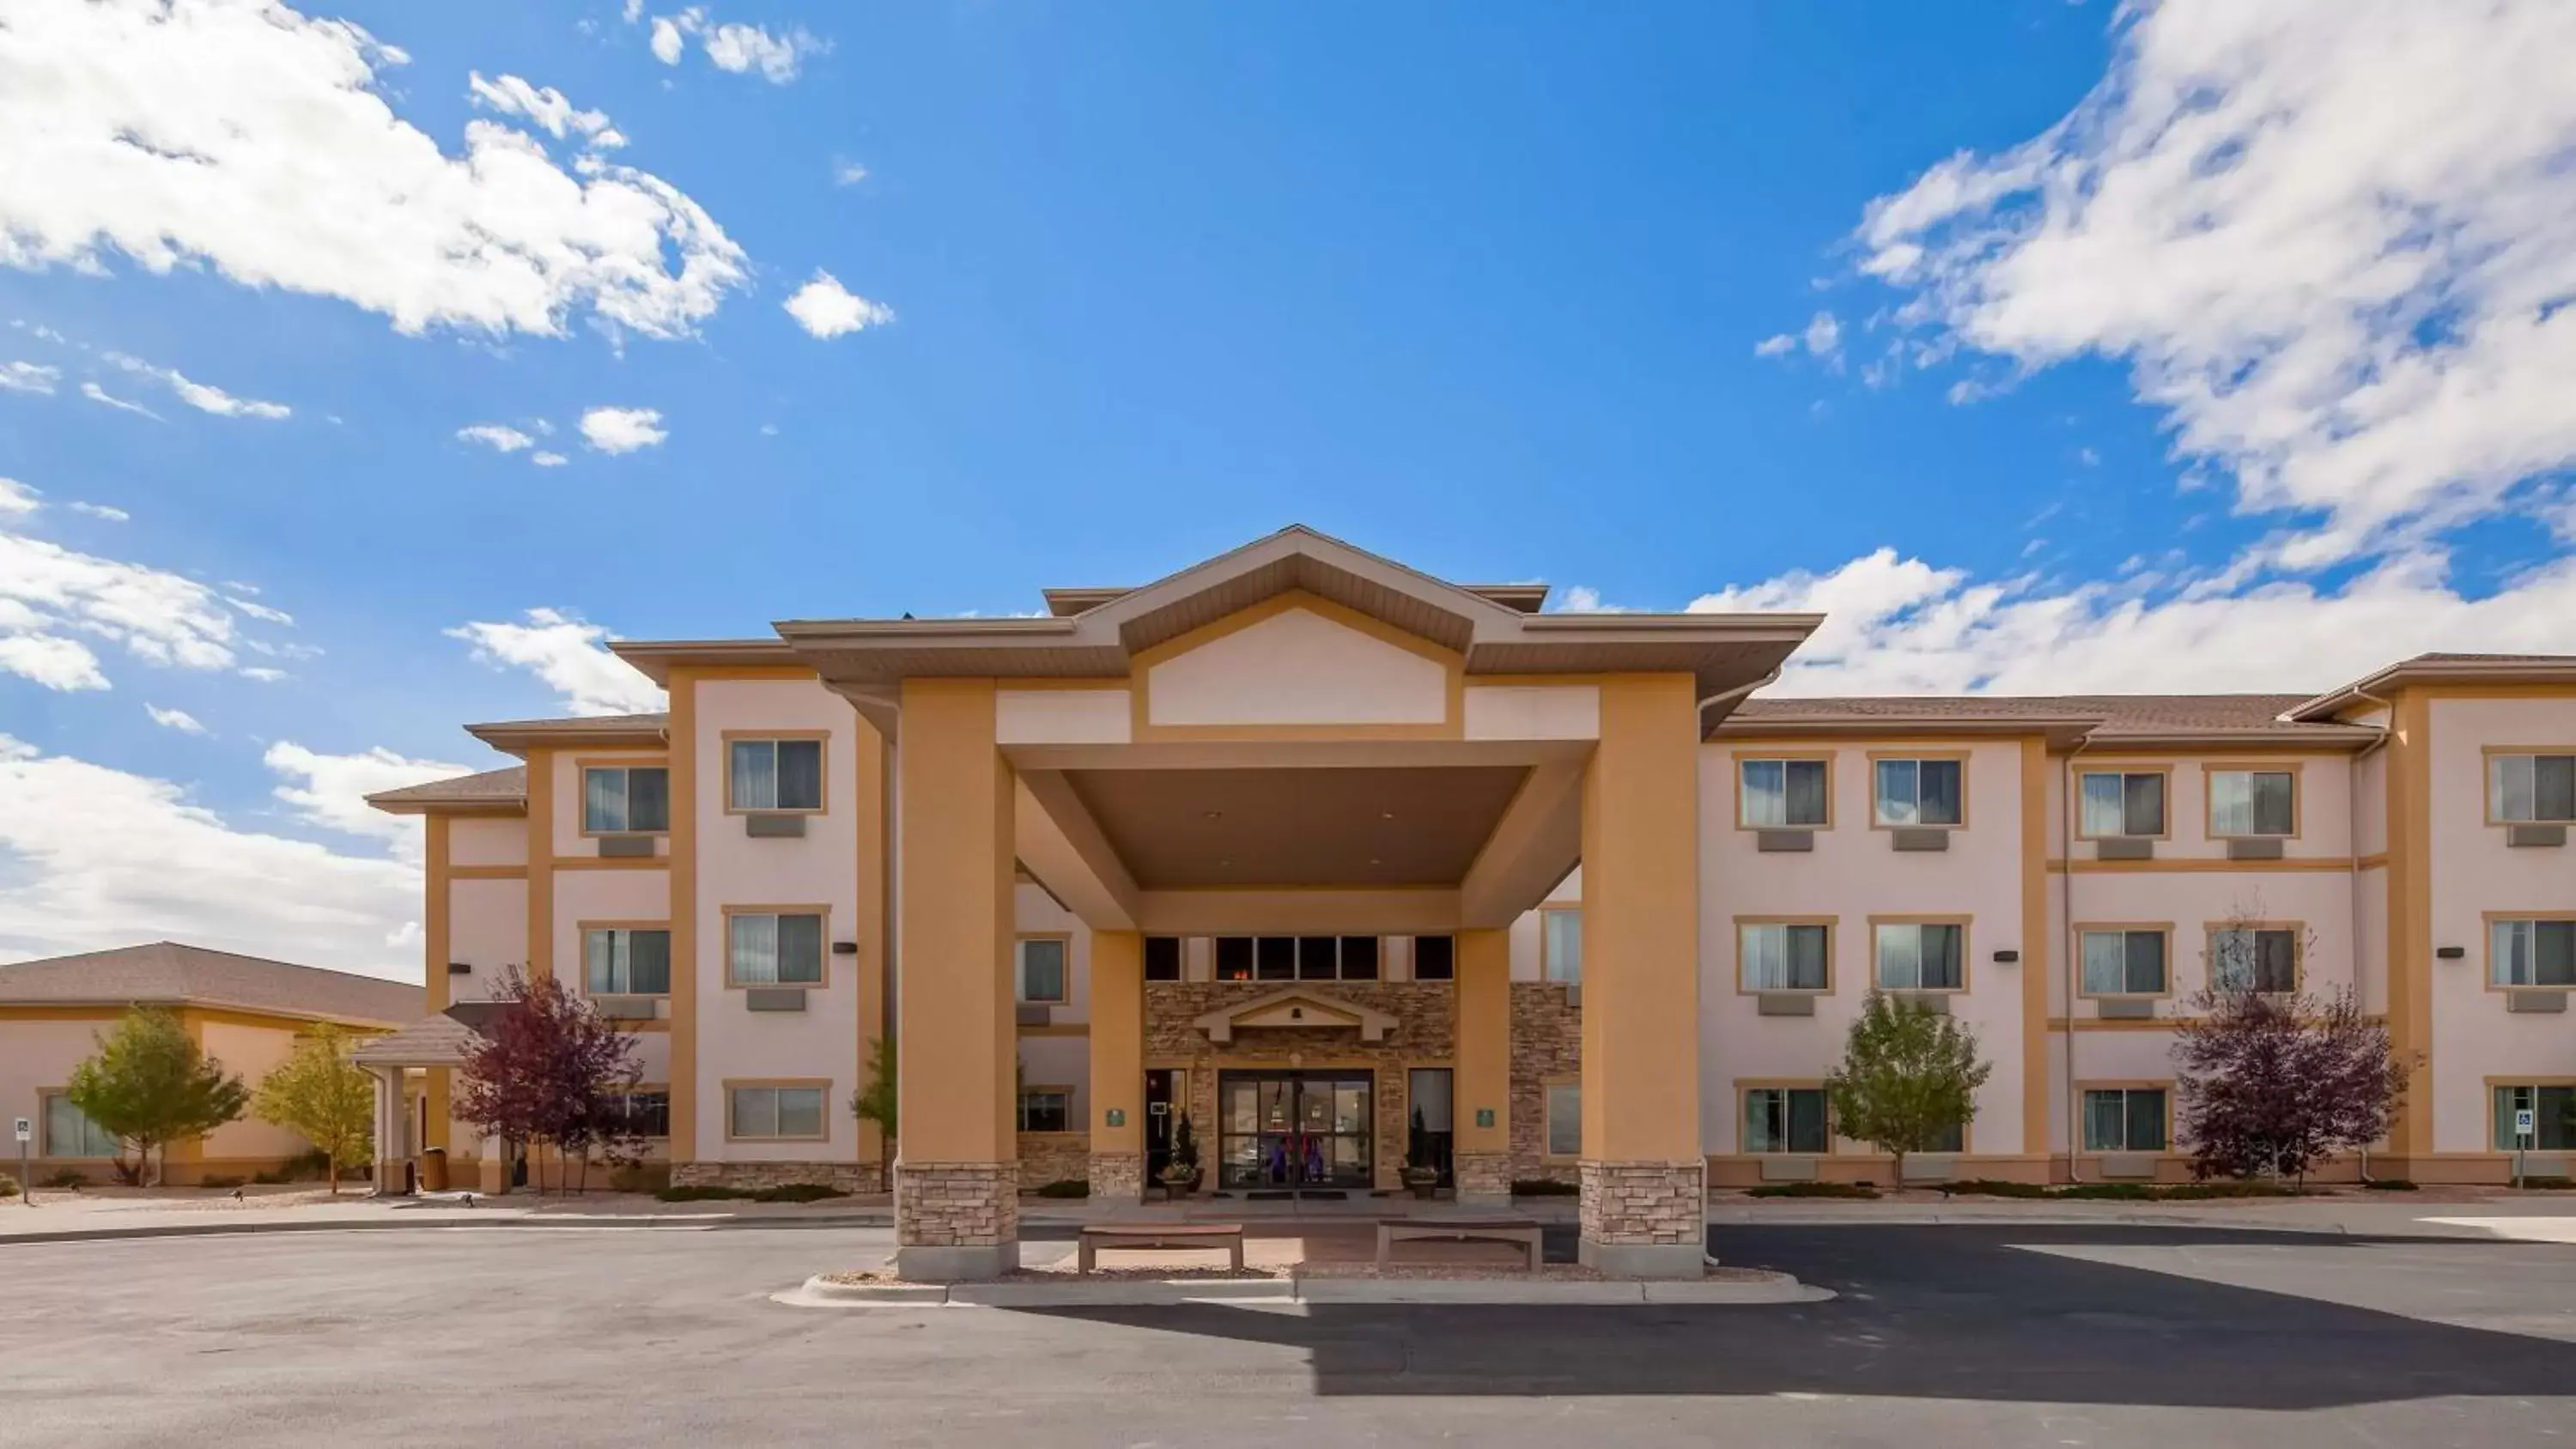 Property Building in Best Western PLUS Fossil Country Inn & Suites